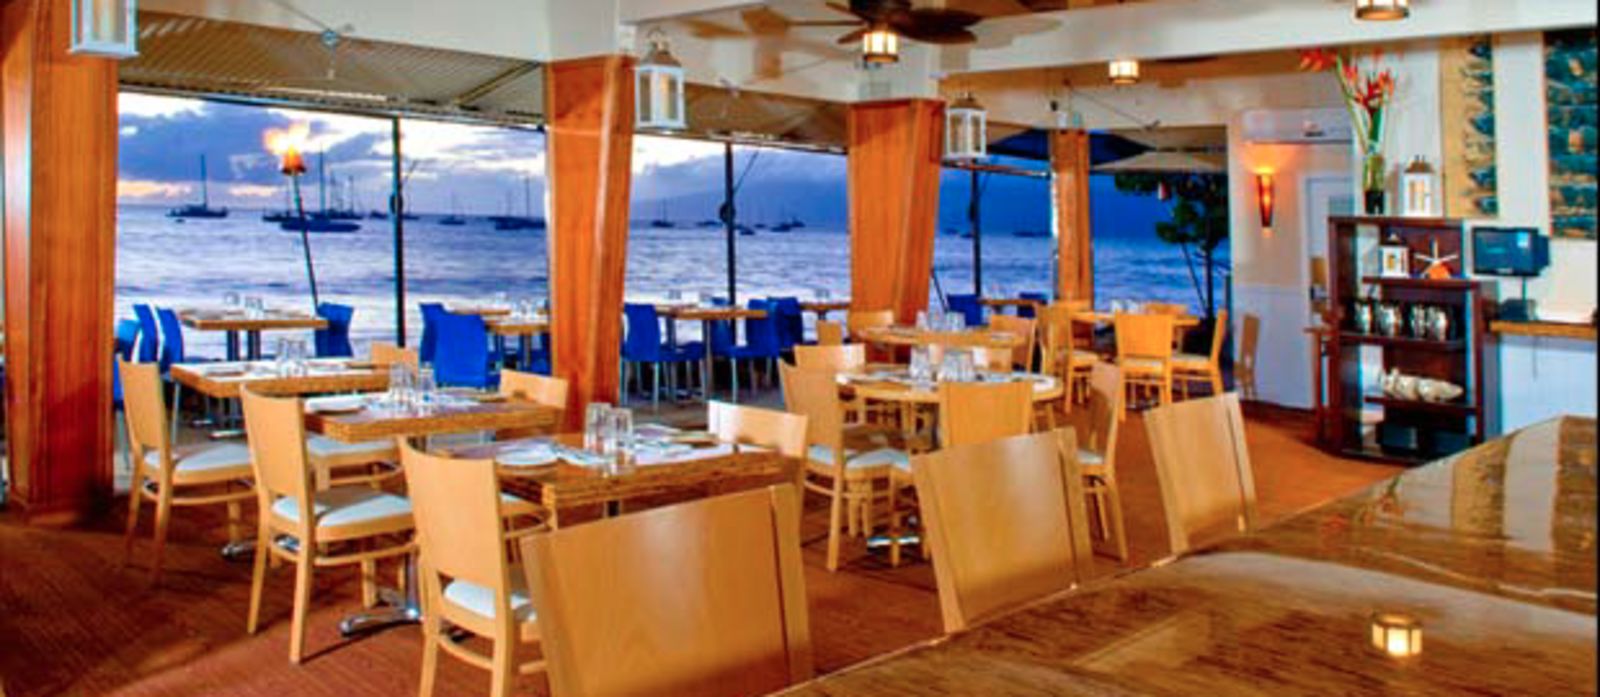 HONU - Seafood and Pizza Restaurant 